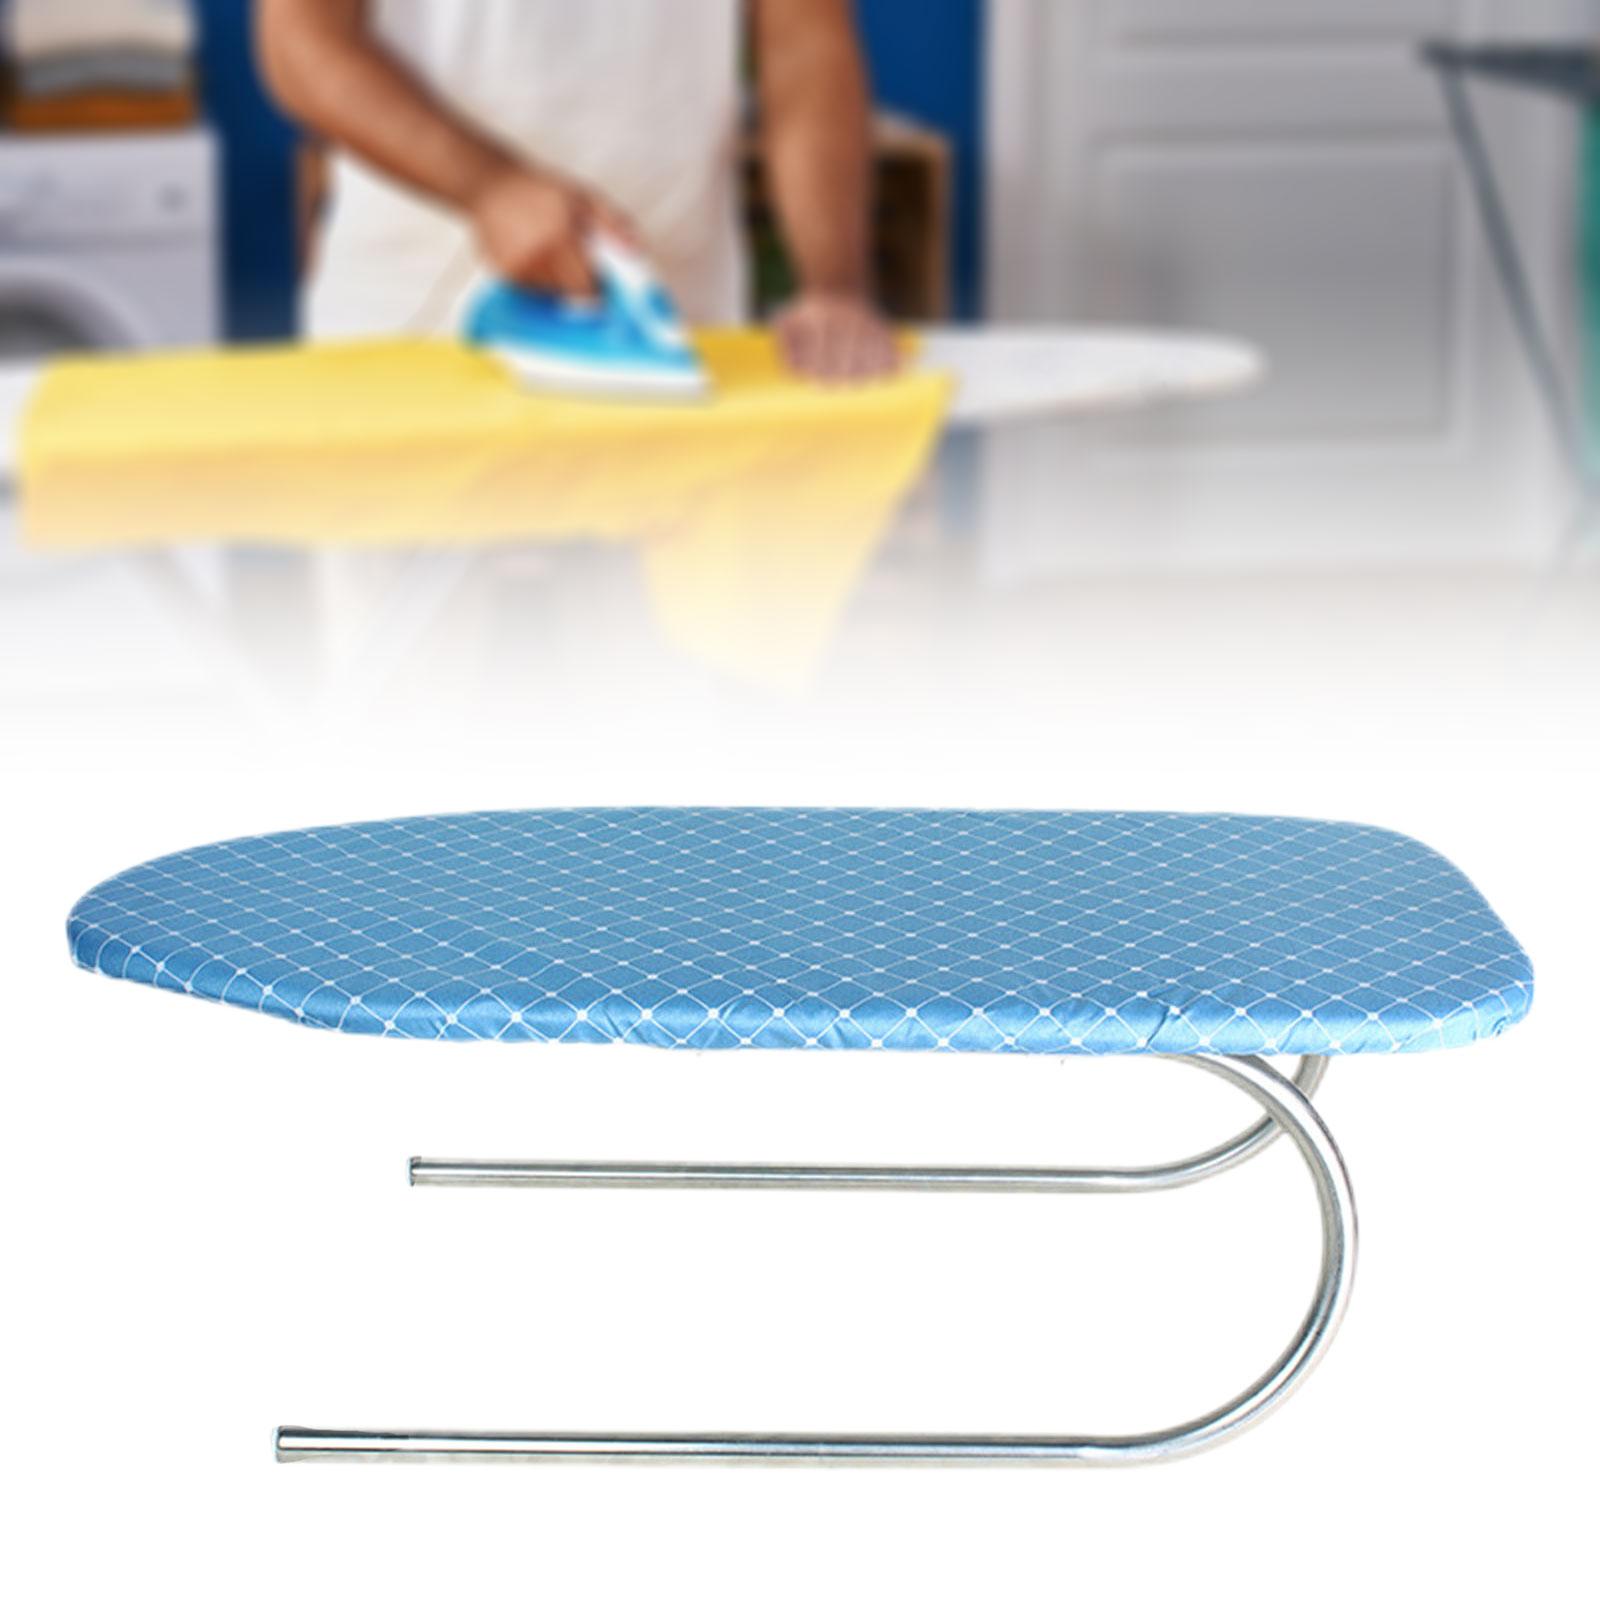 Mini Ironing Board Cuffs Collars Ironing for Apartment Household Sewing Room Iron Mesh